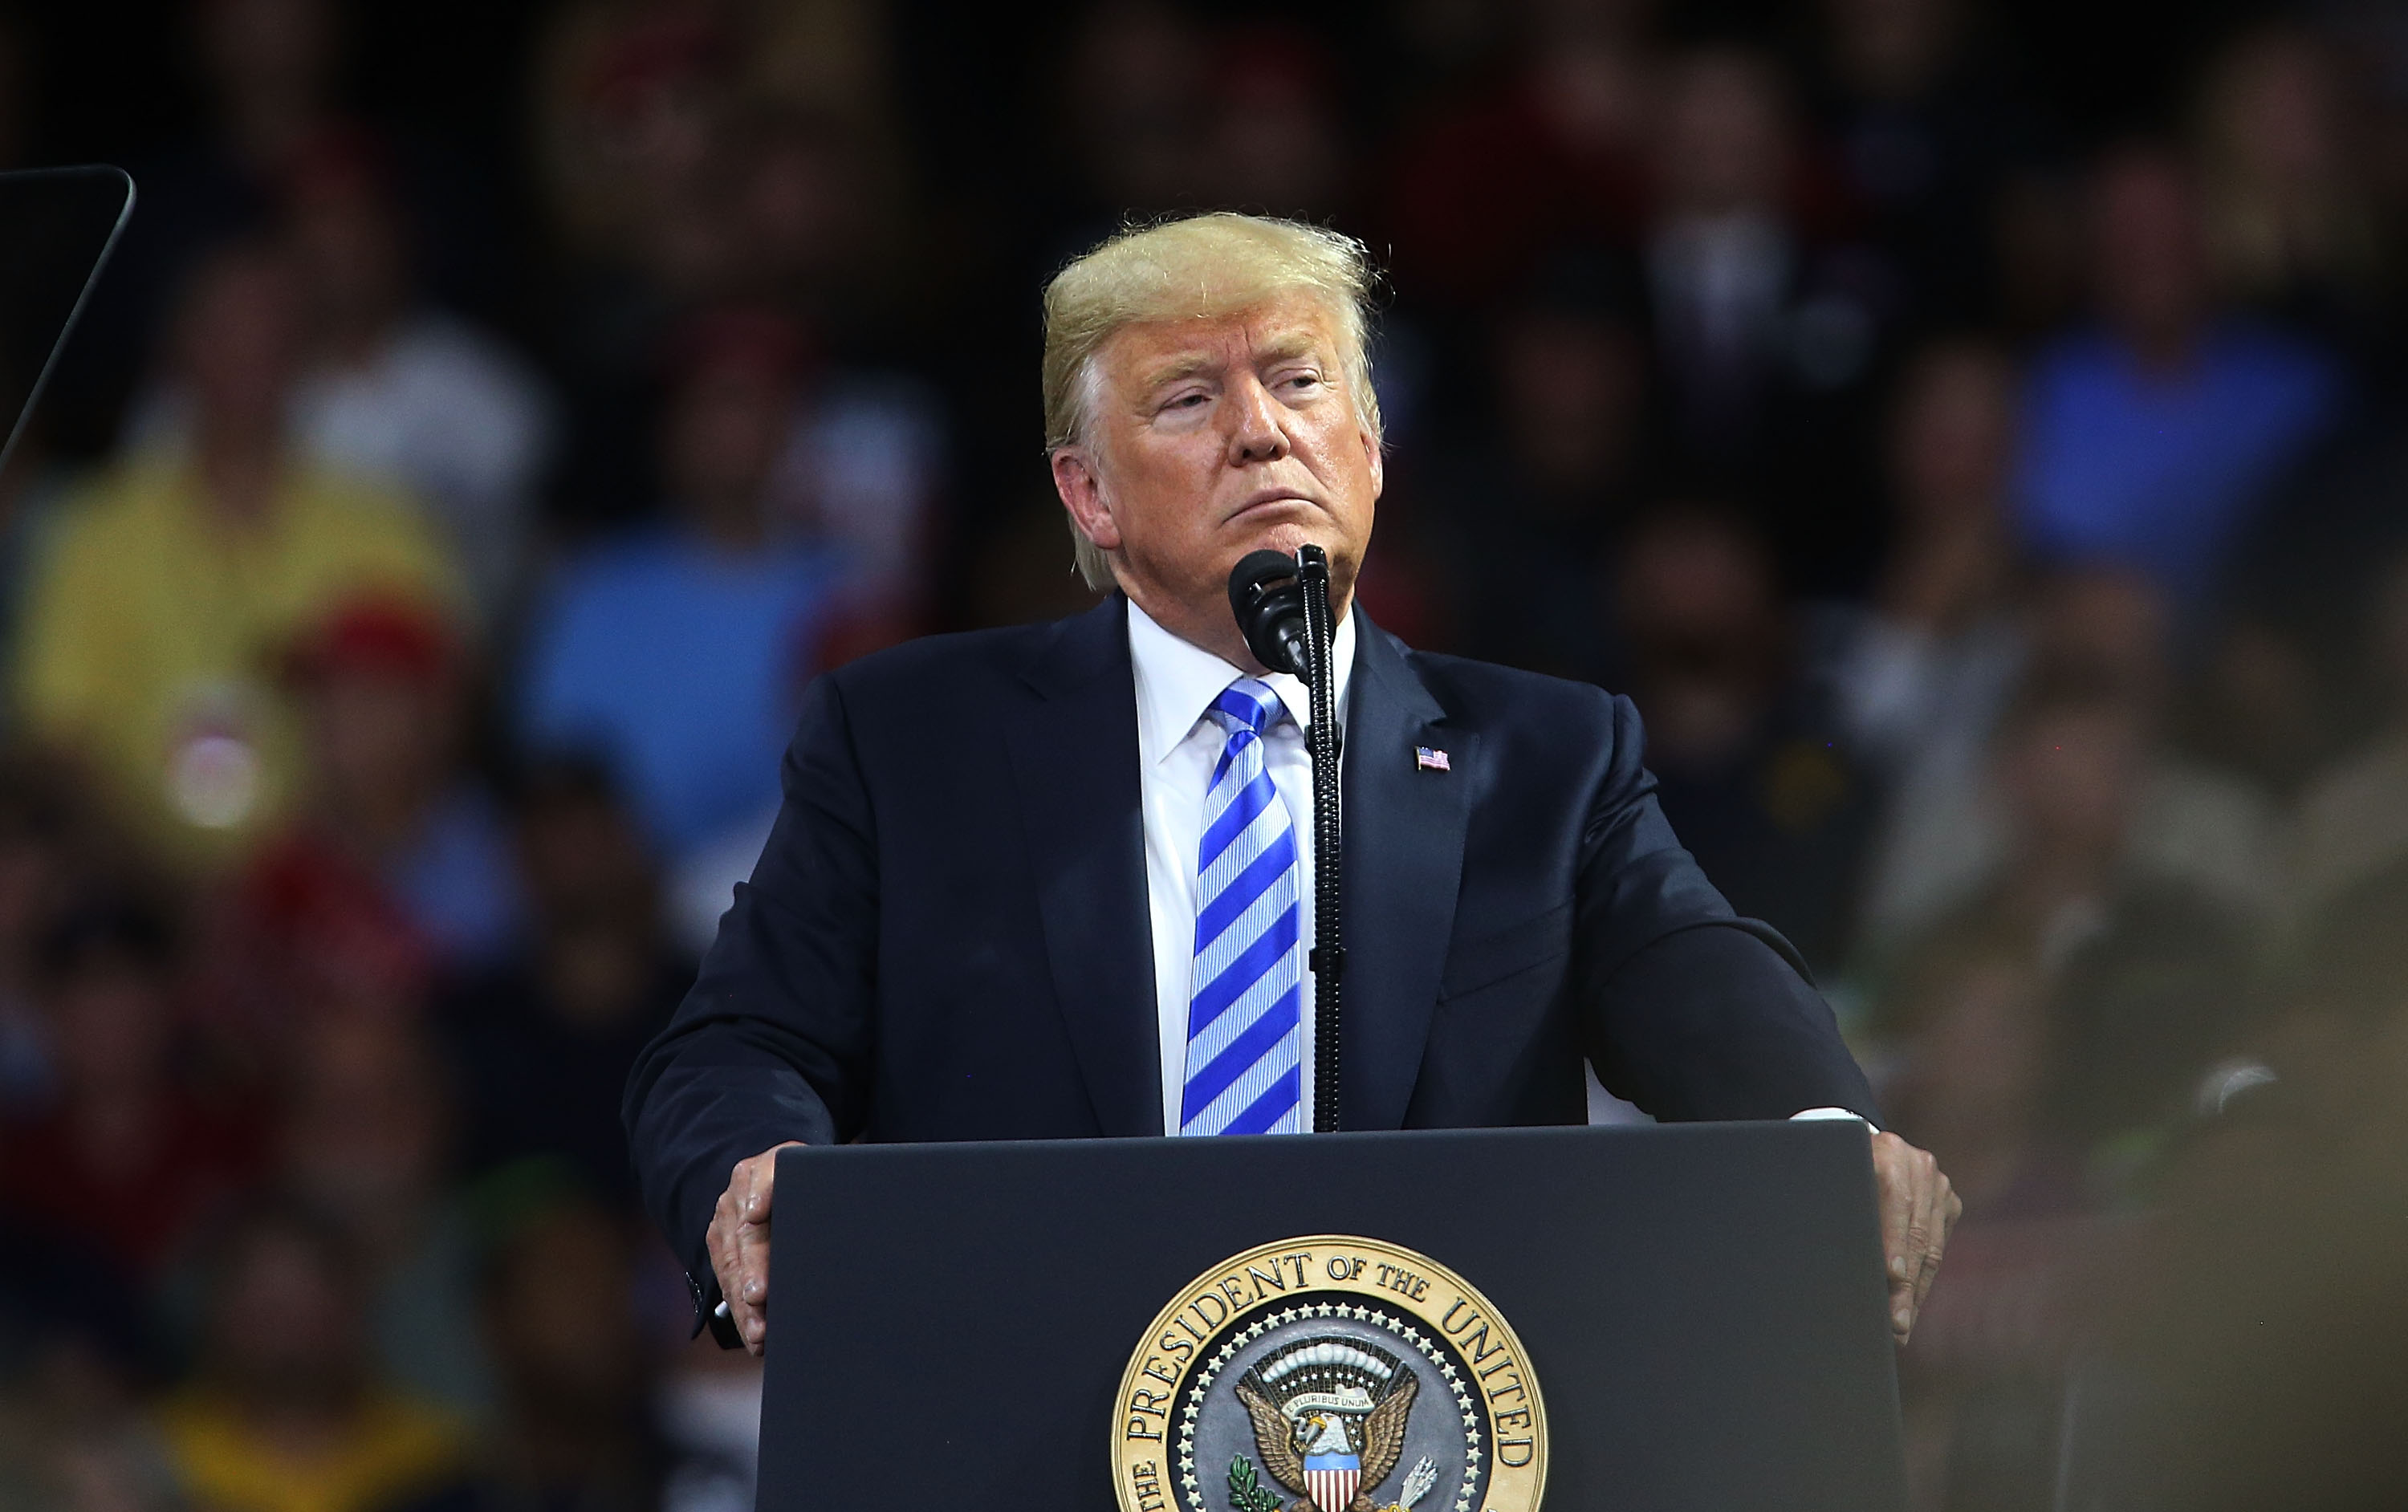 President Trump speaks at a rally at the Charleston Civic Center on August 21, 2018 in Charleston, West Virginia.